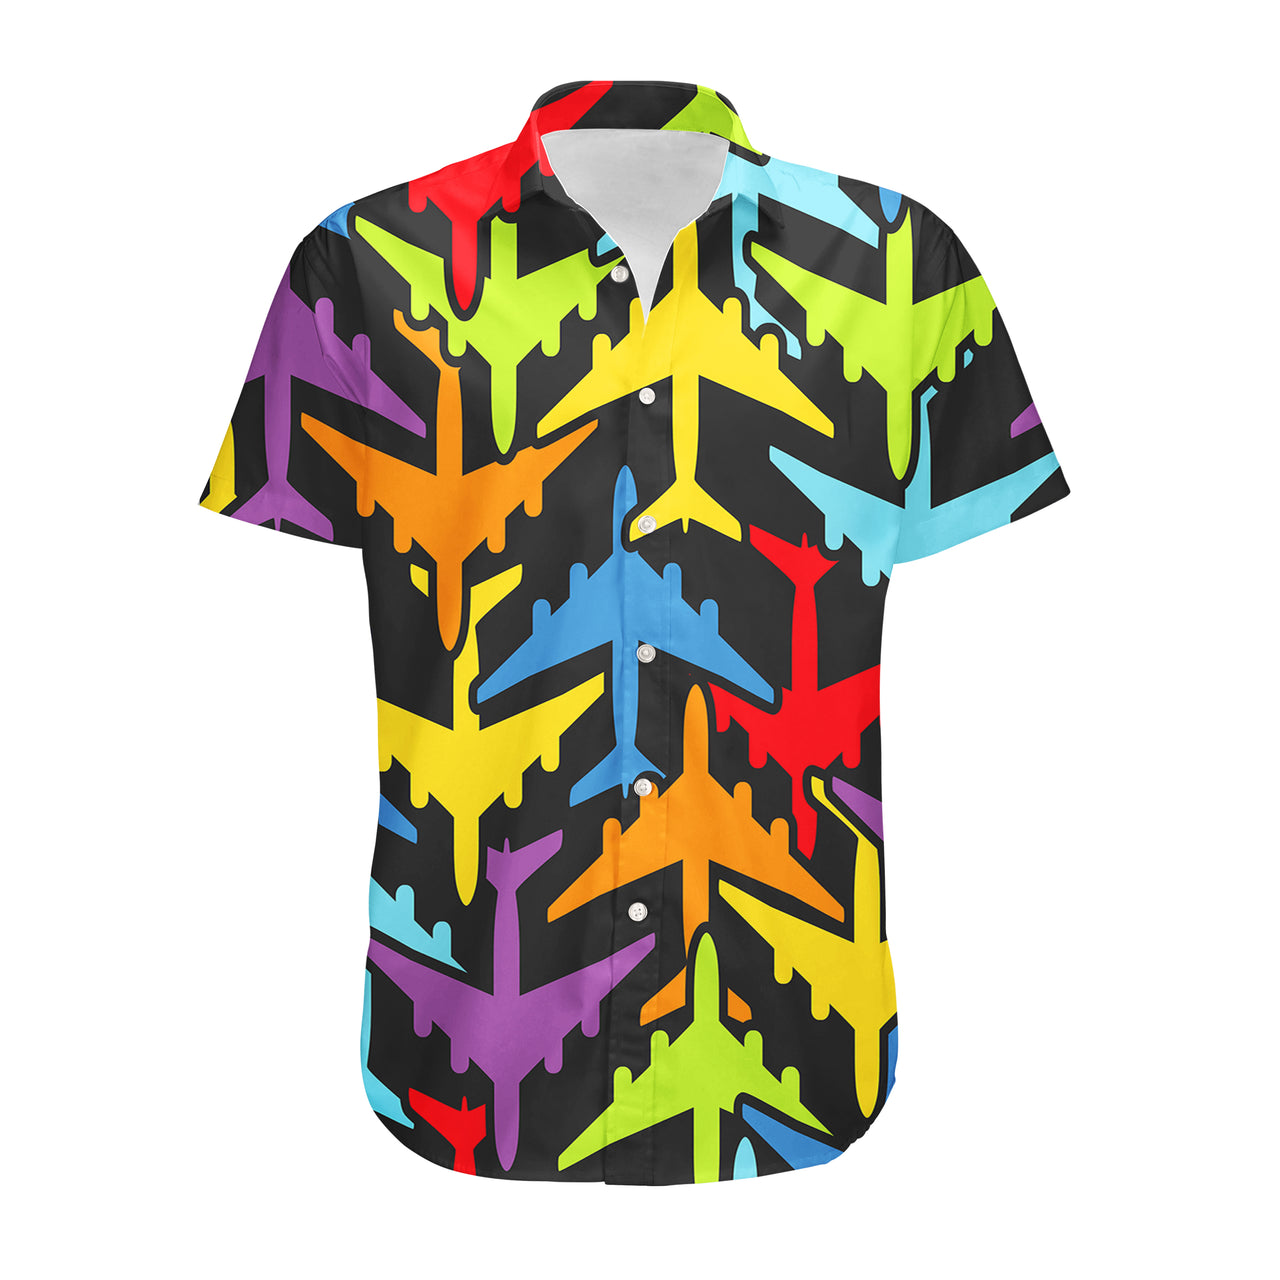 Super Colourful Airplanes Designed 3D Shirts